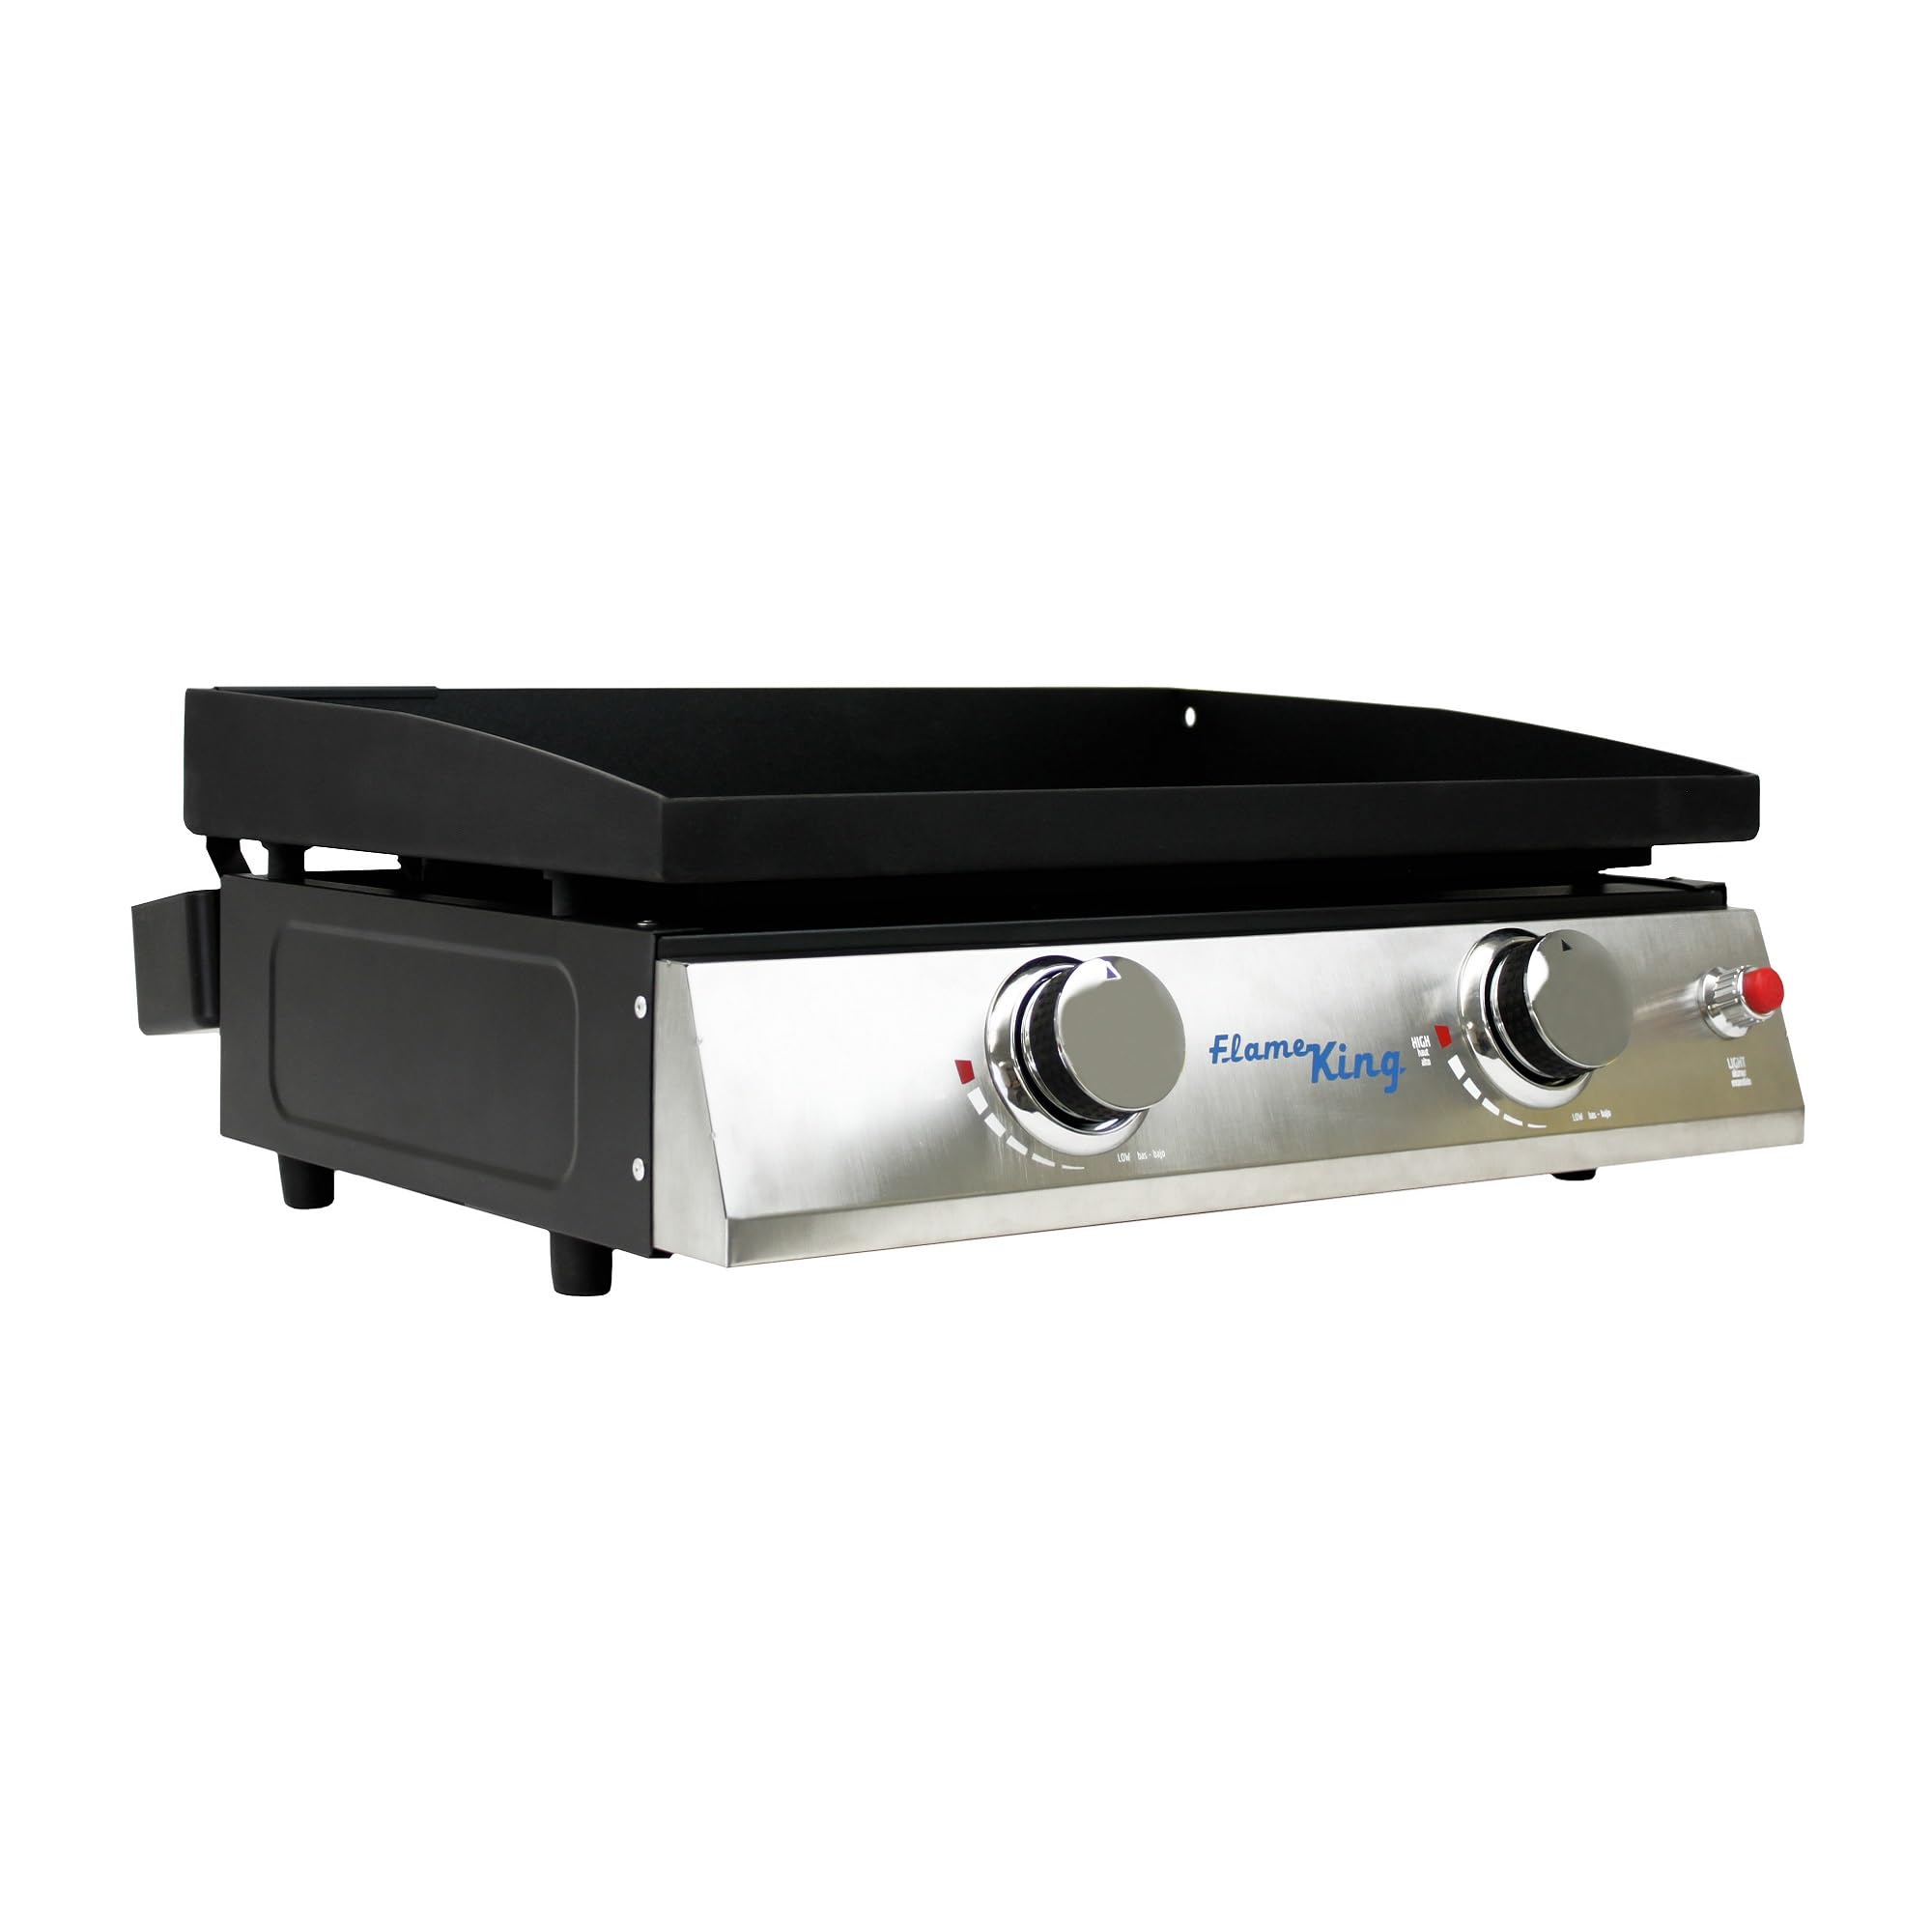 2BURNER PROPANE TABLETOP 22IN HEAVY DUTY FLAT TOP CAST IRON GRIDDLE GRILL STAT